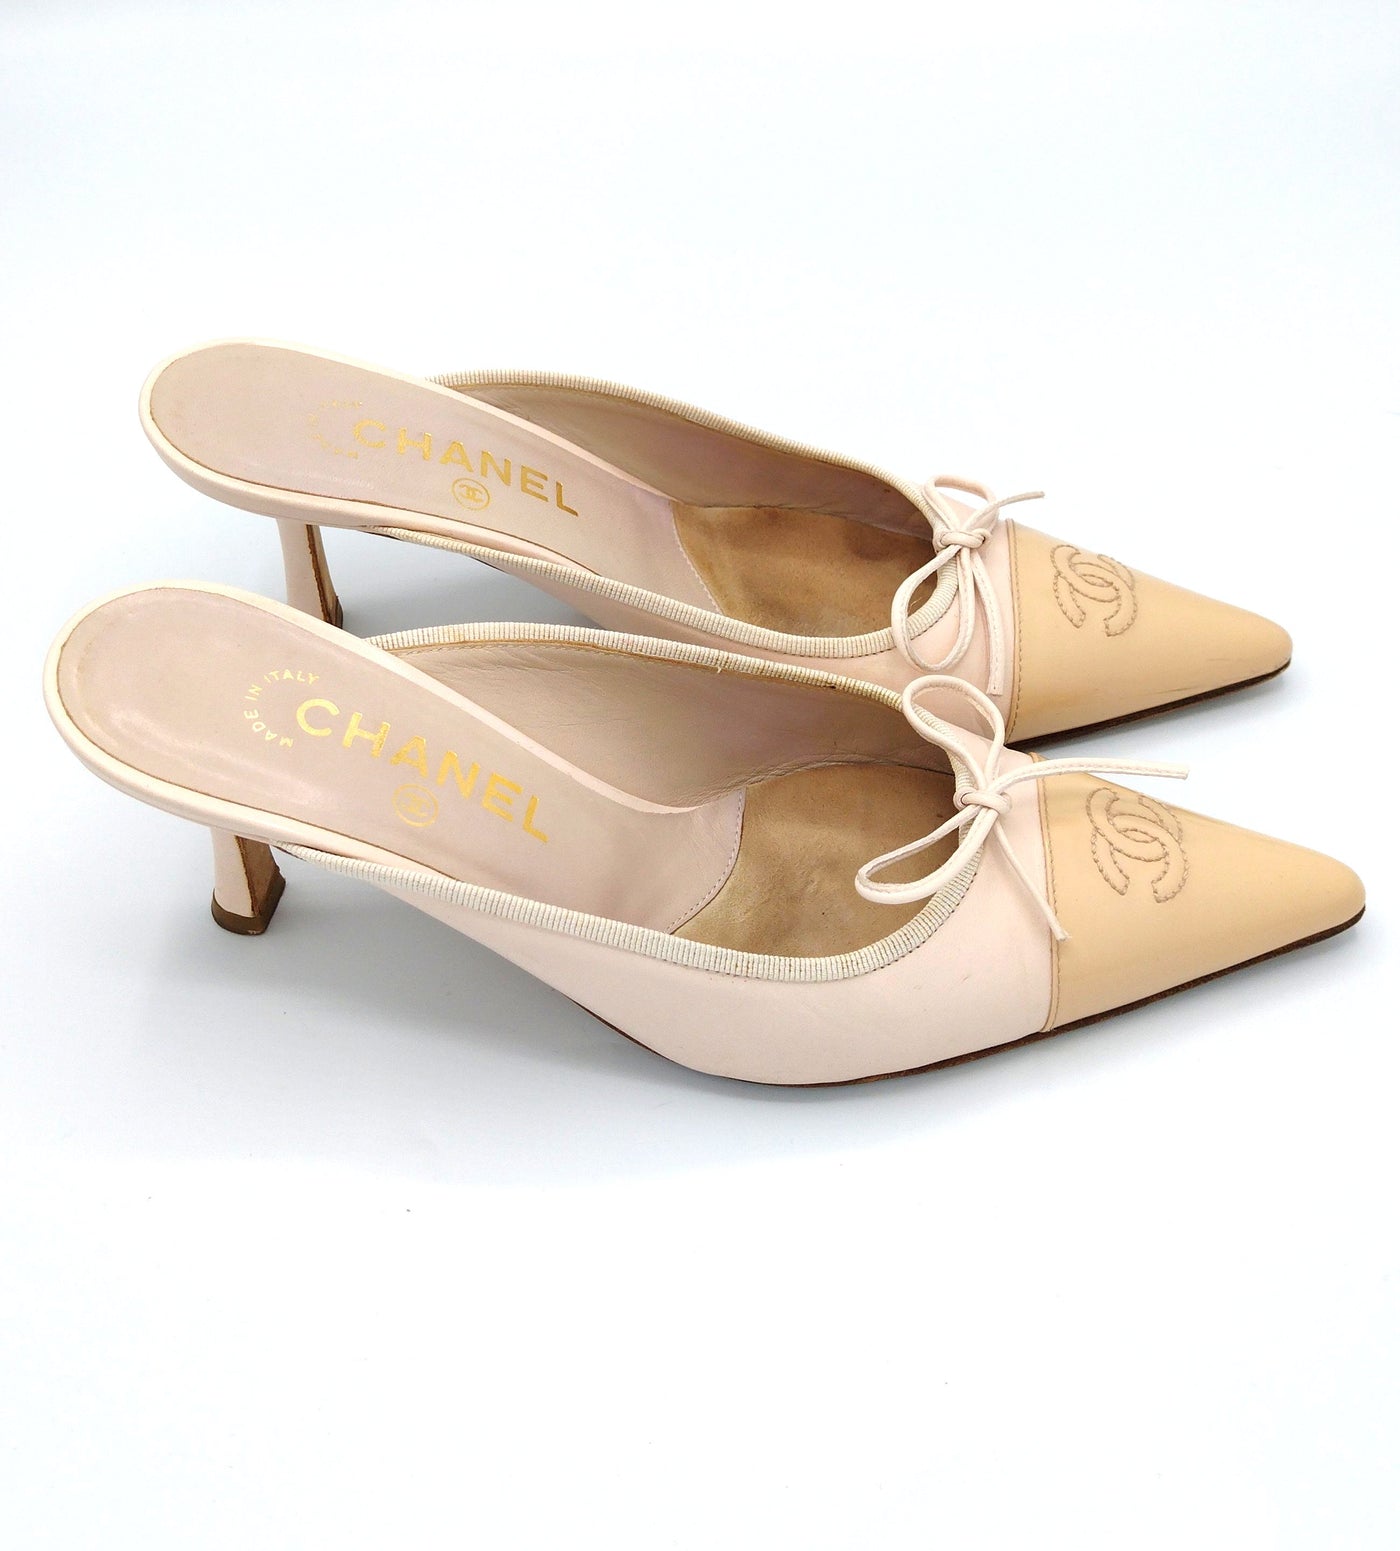 CHANEL vintage beige and cream mules in size 38